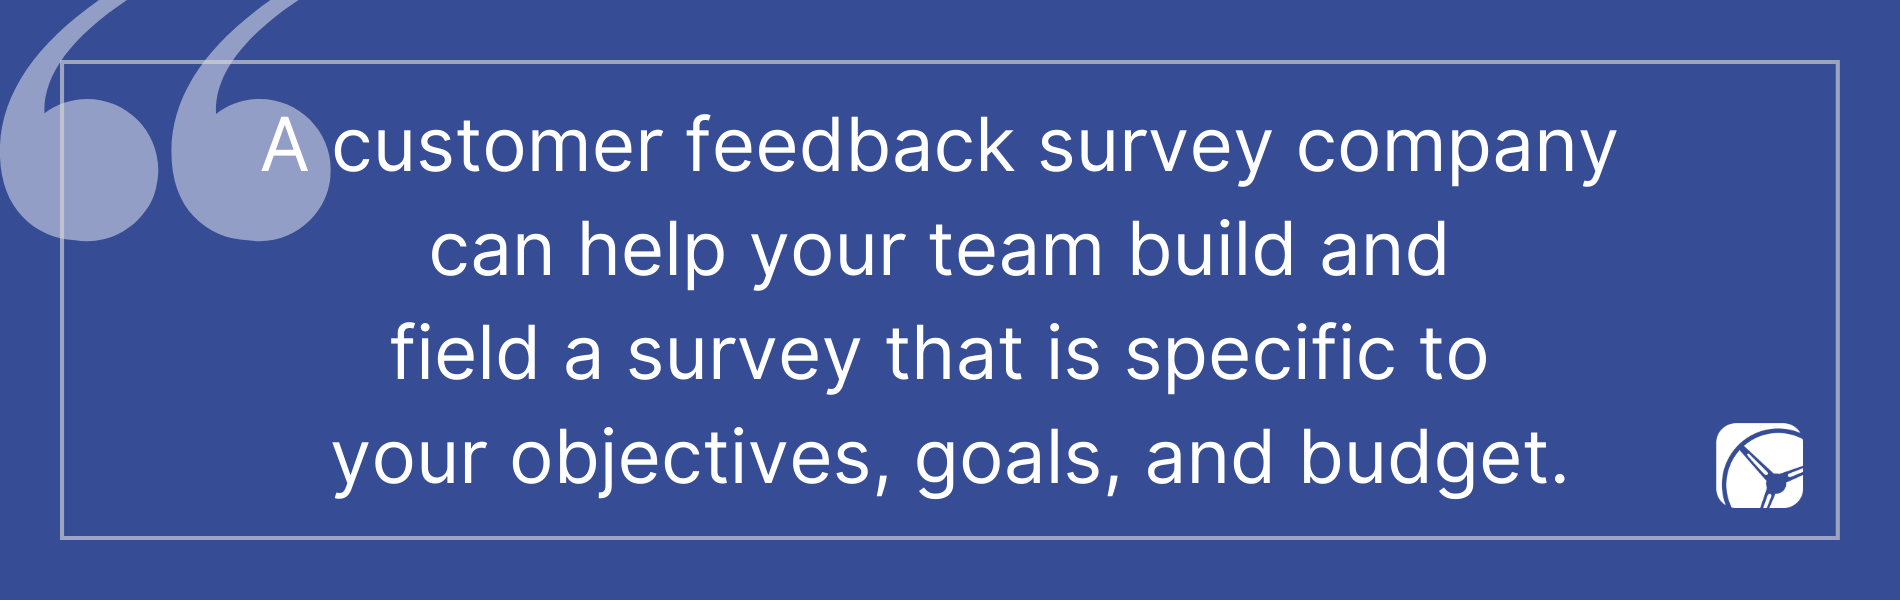 A customer feedback survey company  can help your team build and  field a survey that is specific to  your objectives, goals, and budget.